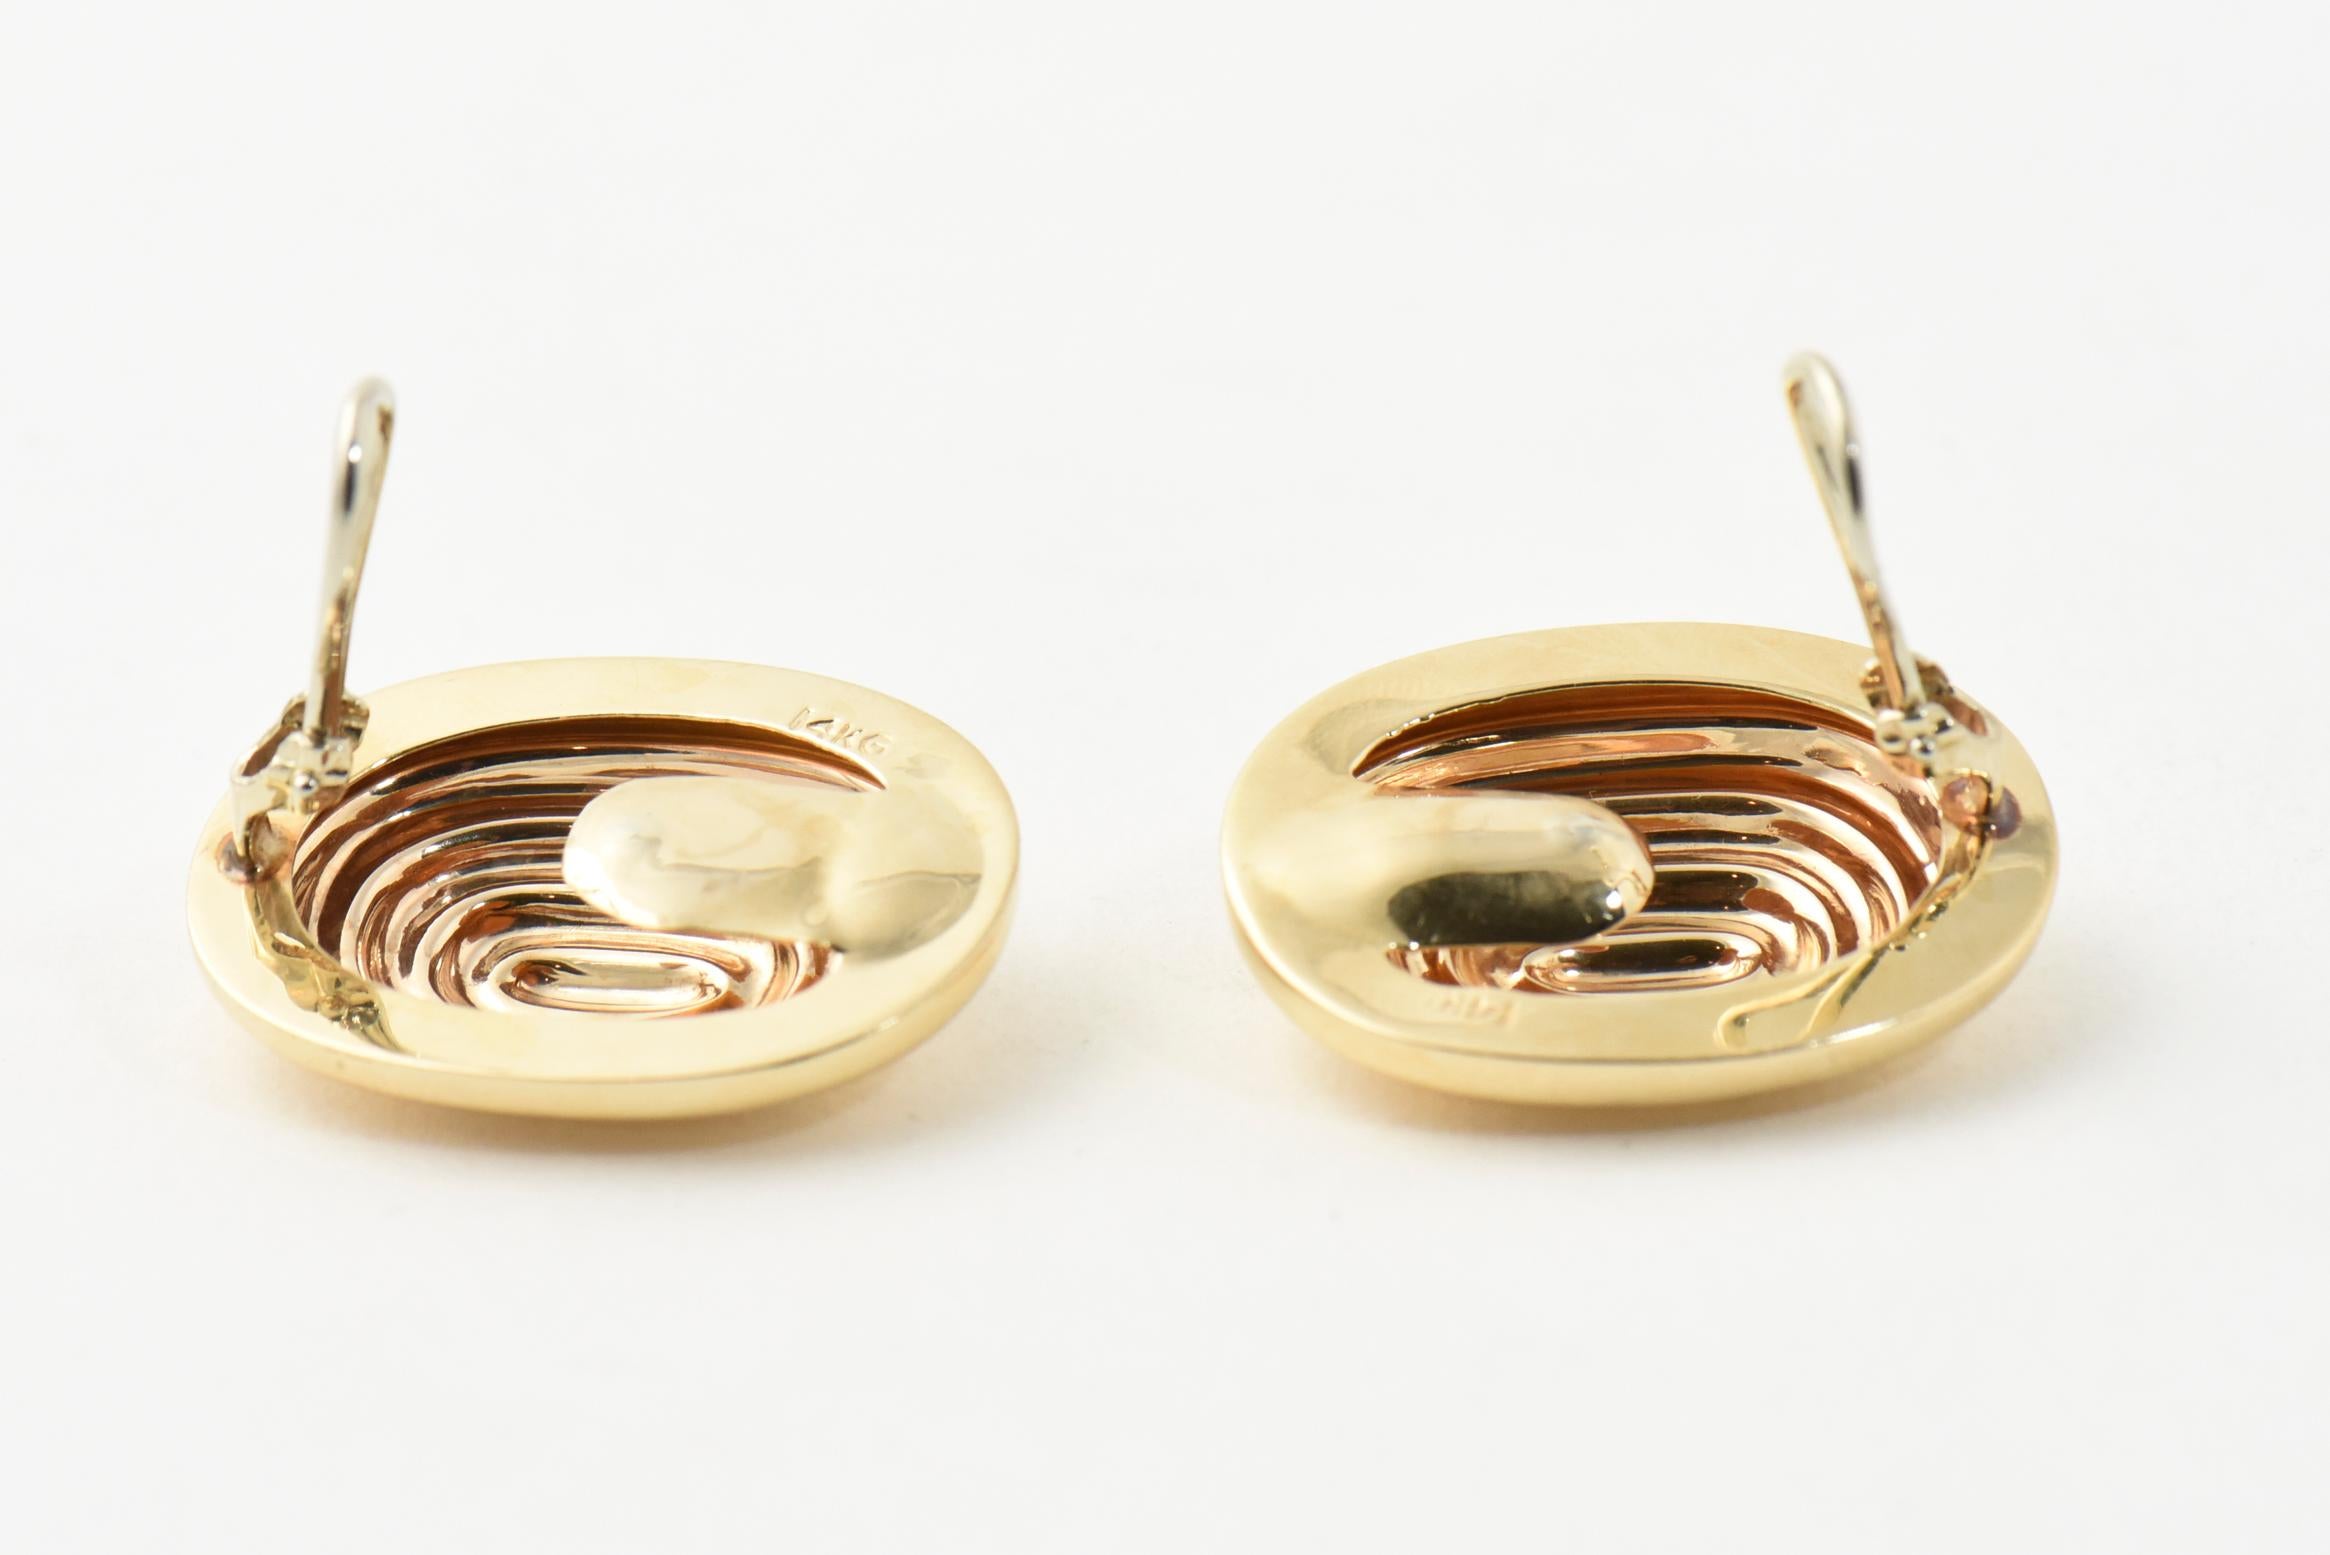 Modern Oval Gold Ridged Fluted Design Earrings and Ring Suite For Sale 2